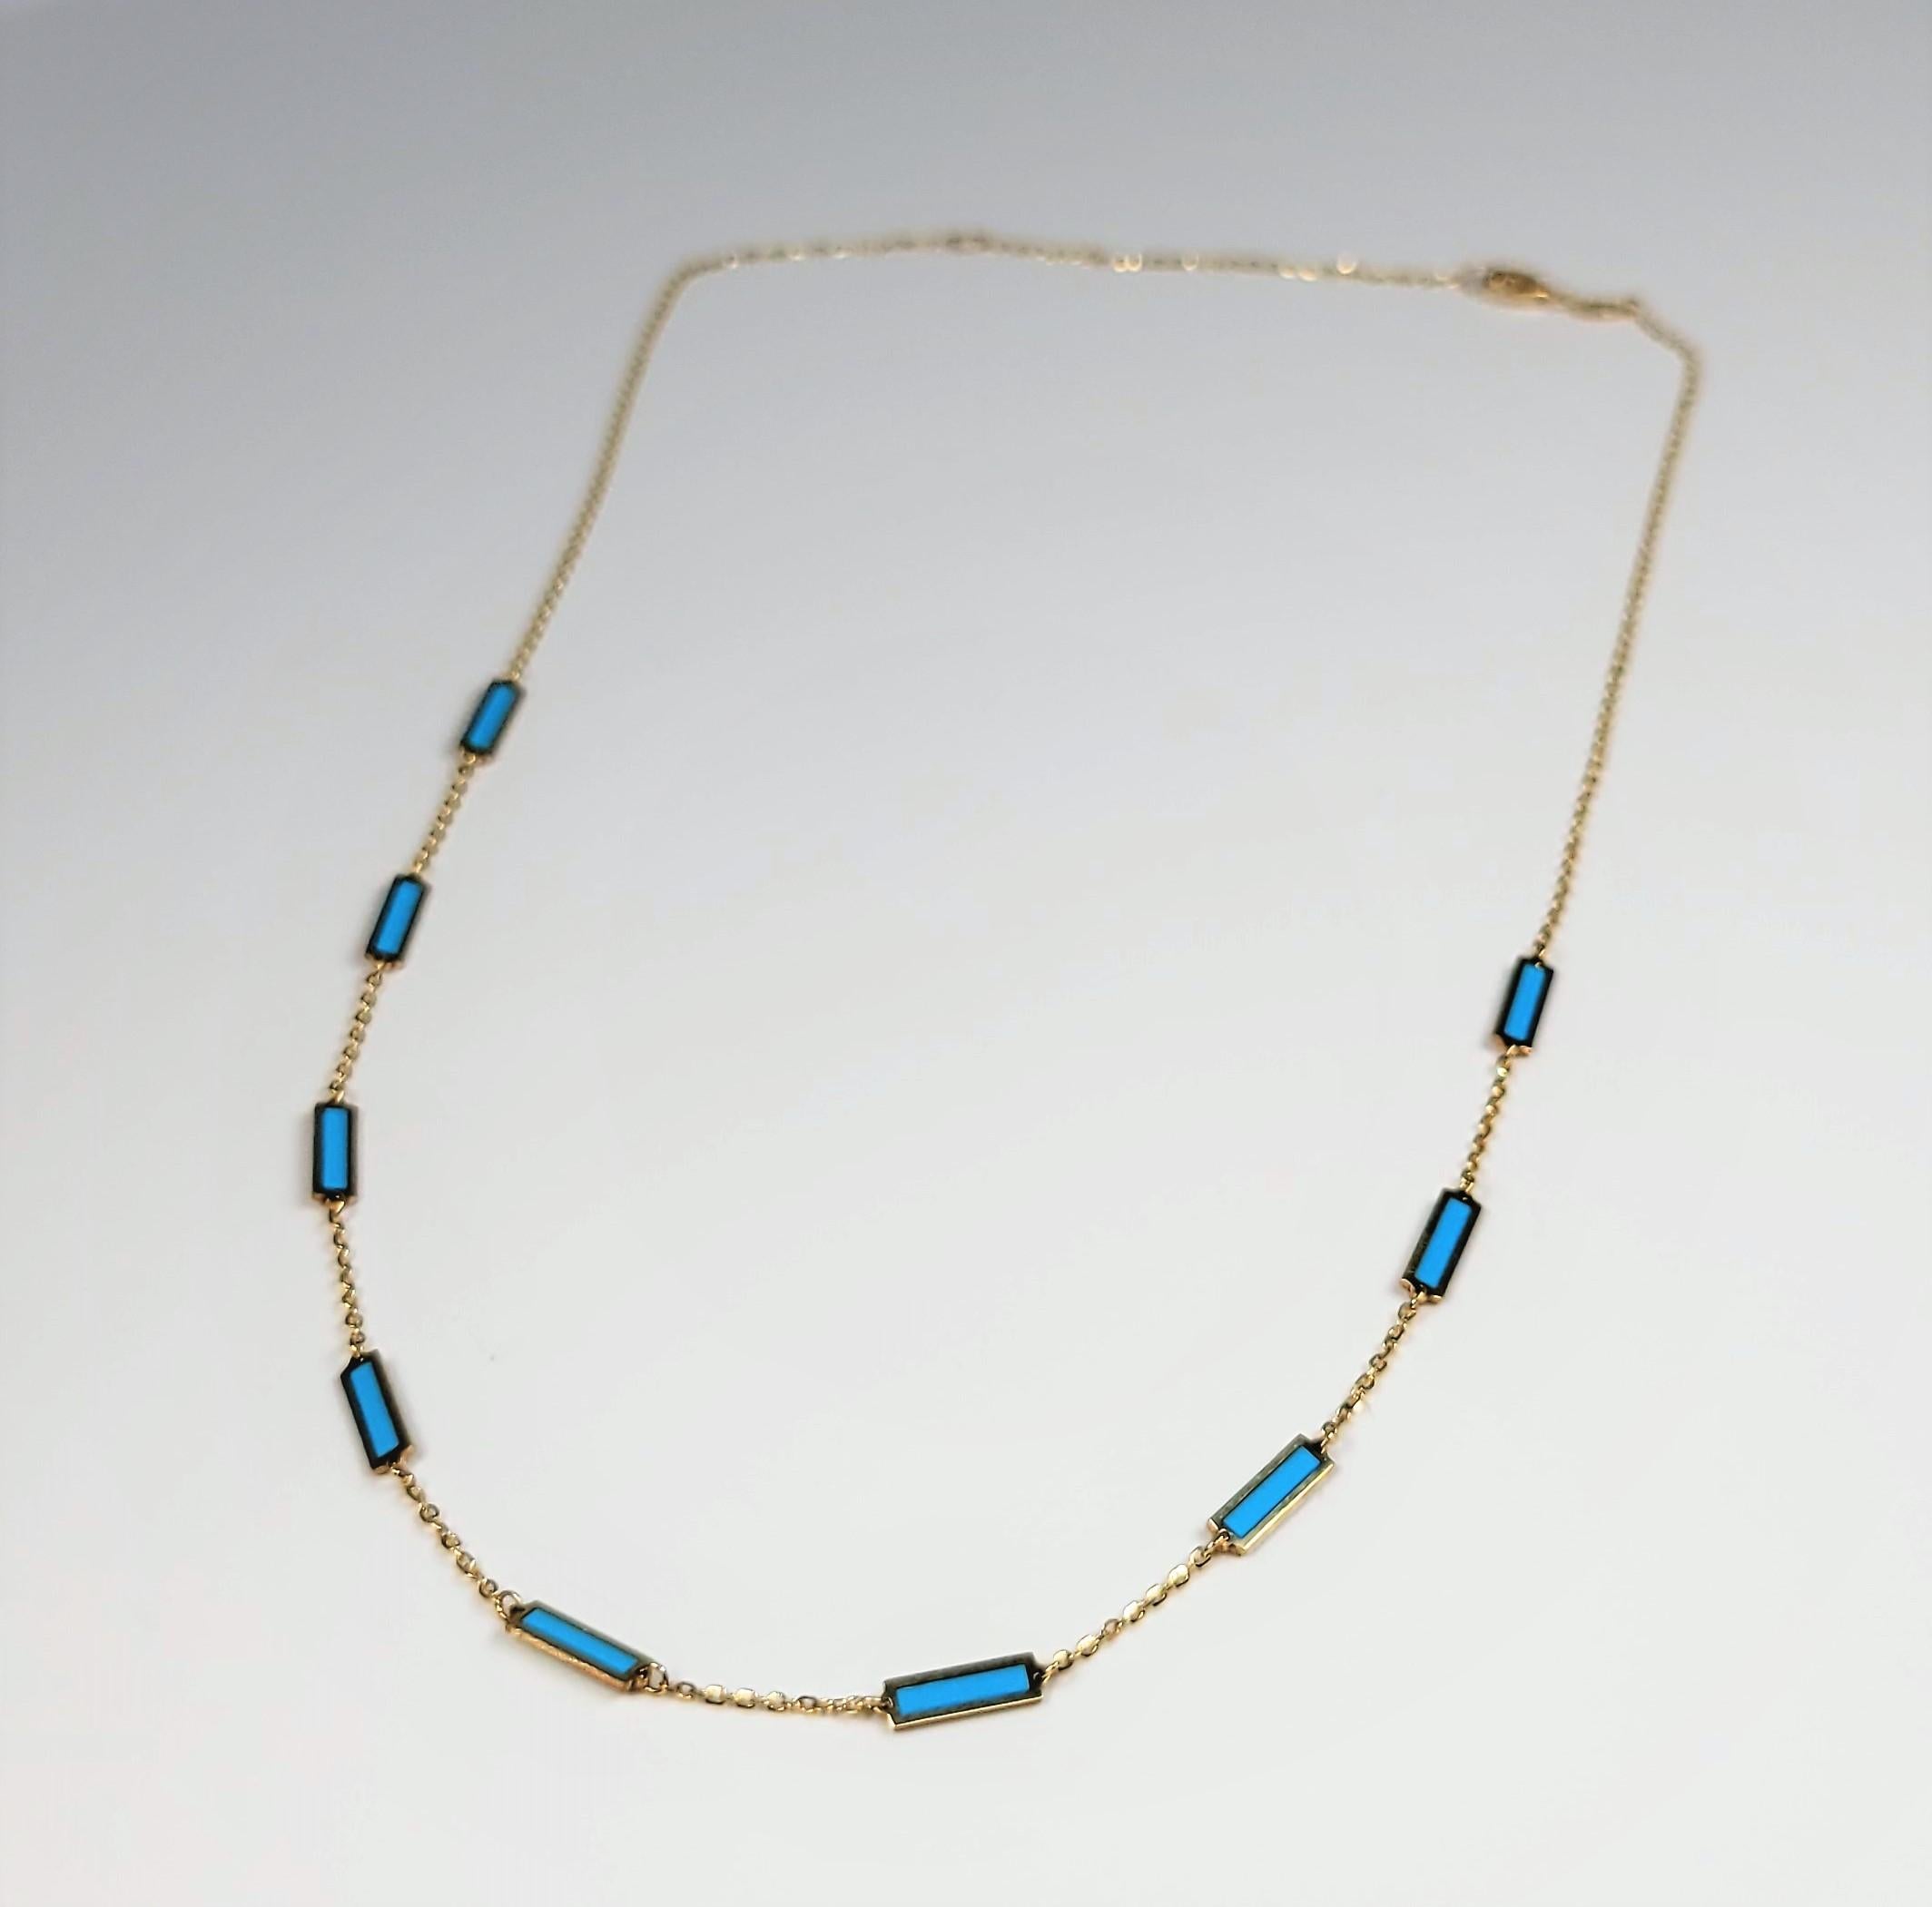 This fun adjustable yellow gold and turquoise station necklace can be worn as  16